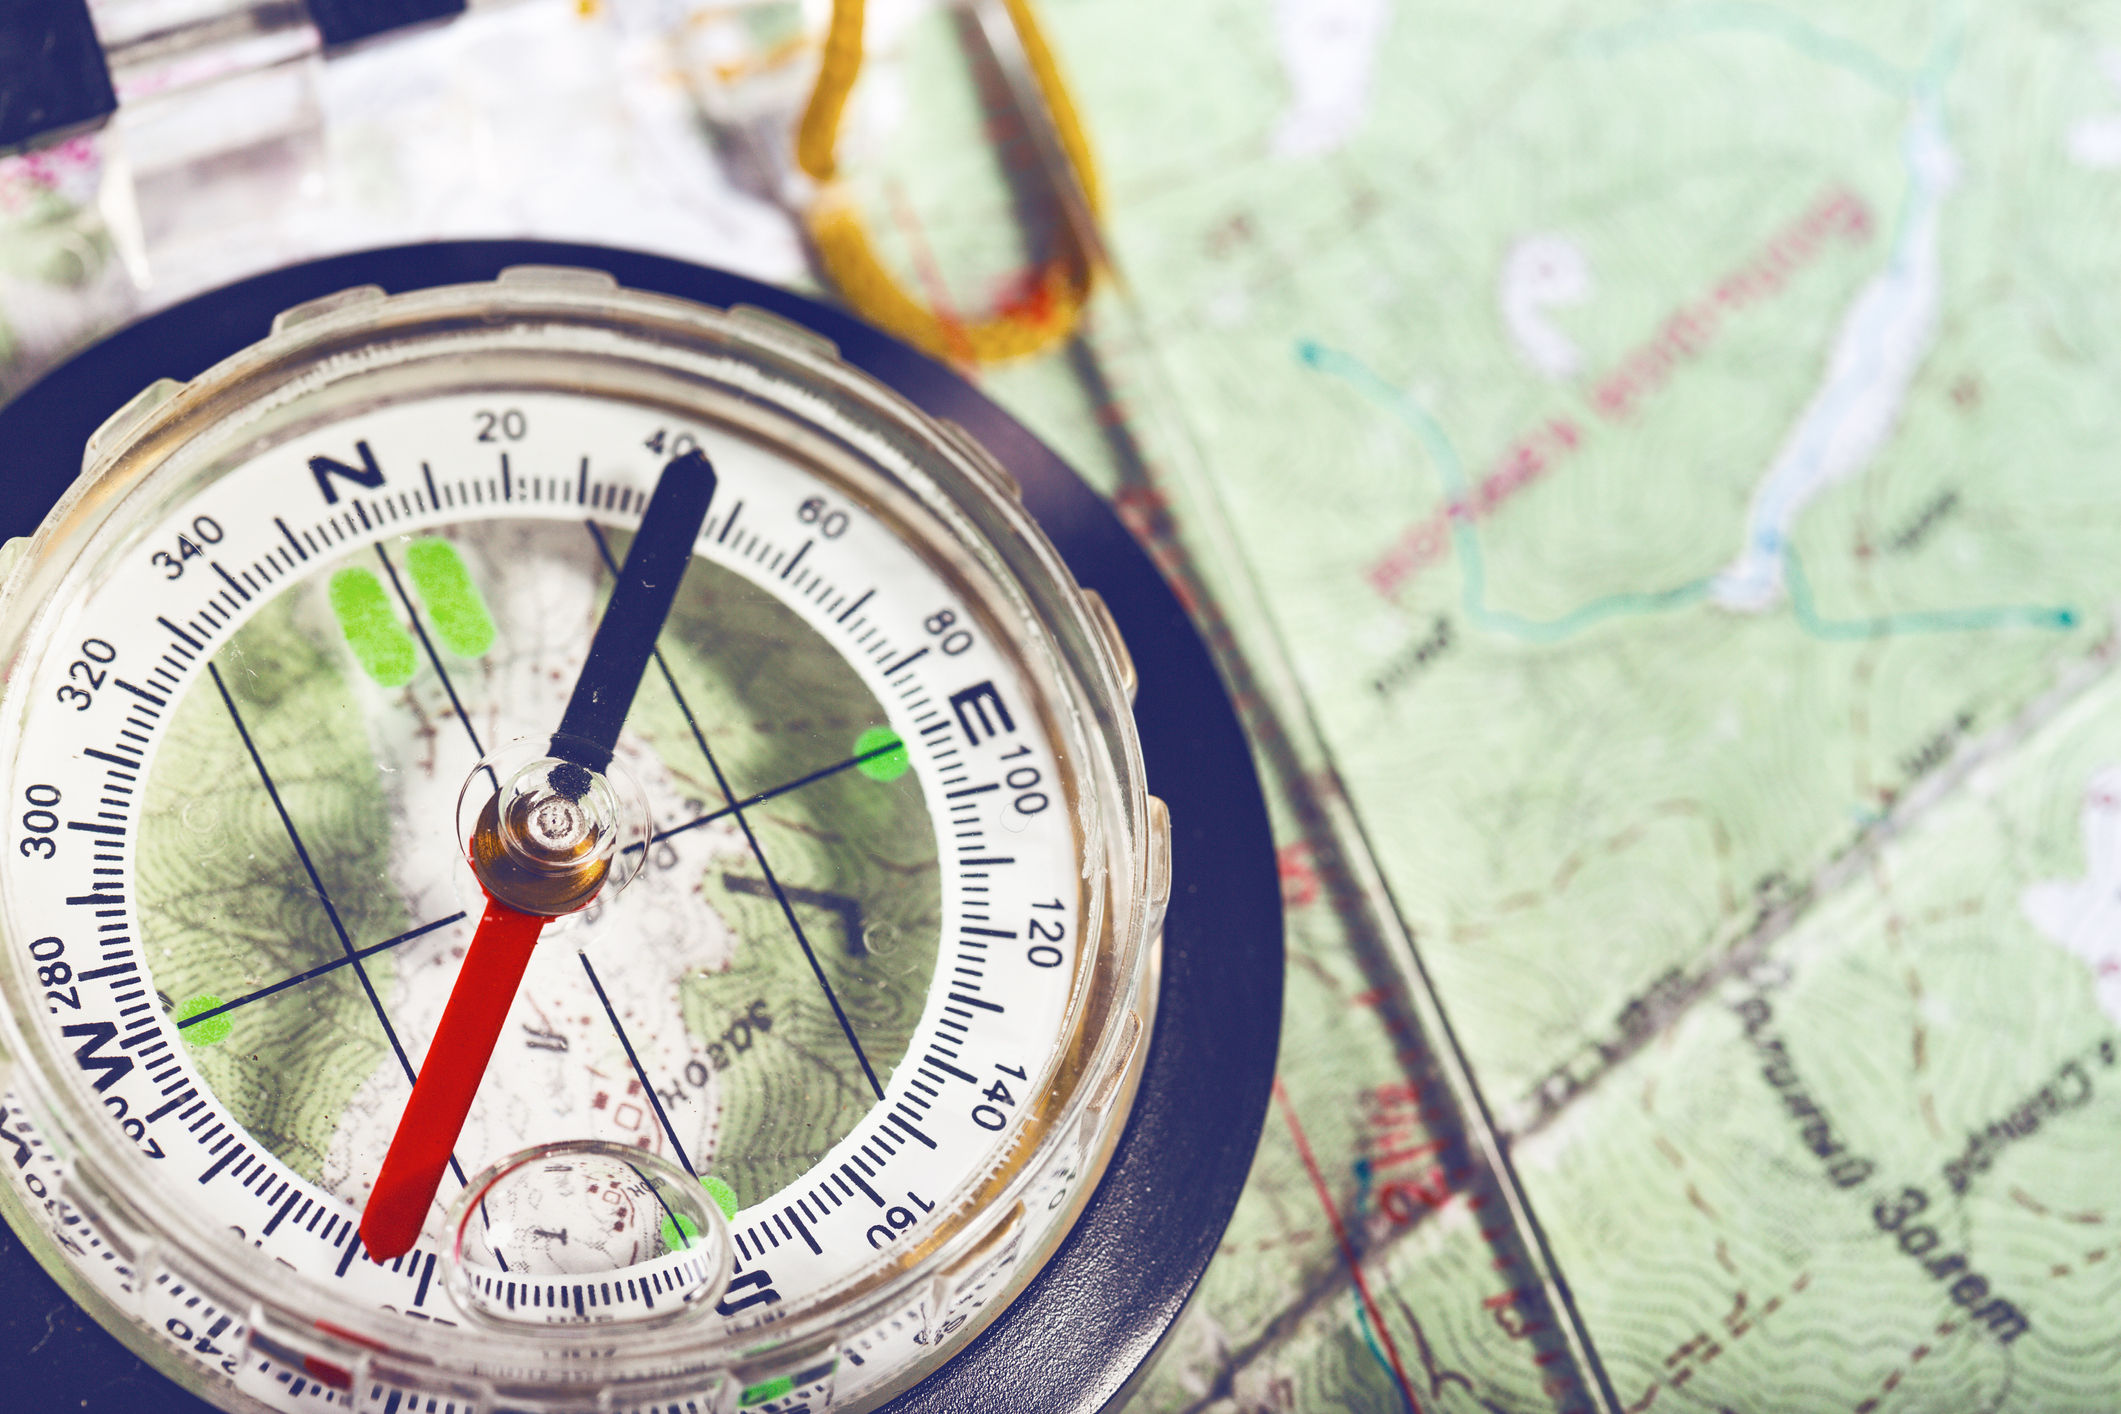 In age of GPS, park ranger teaches map and compass skills - WTOP News